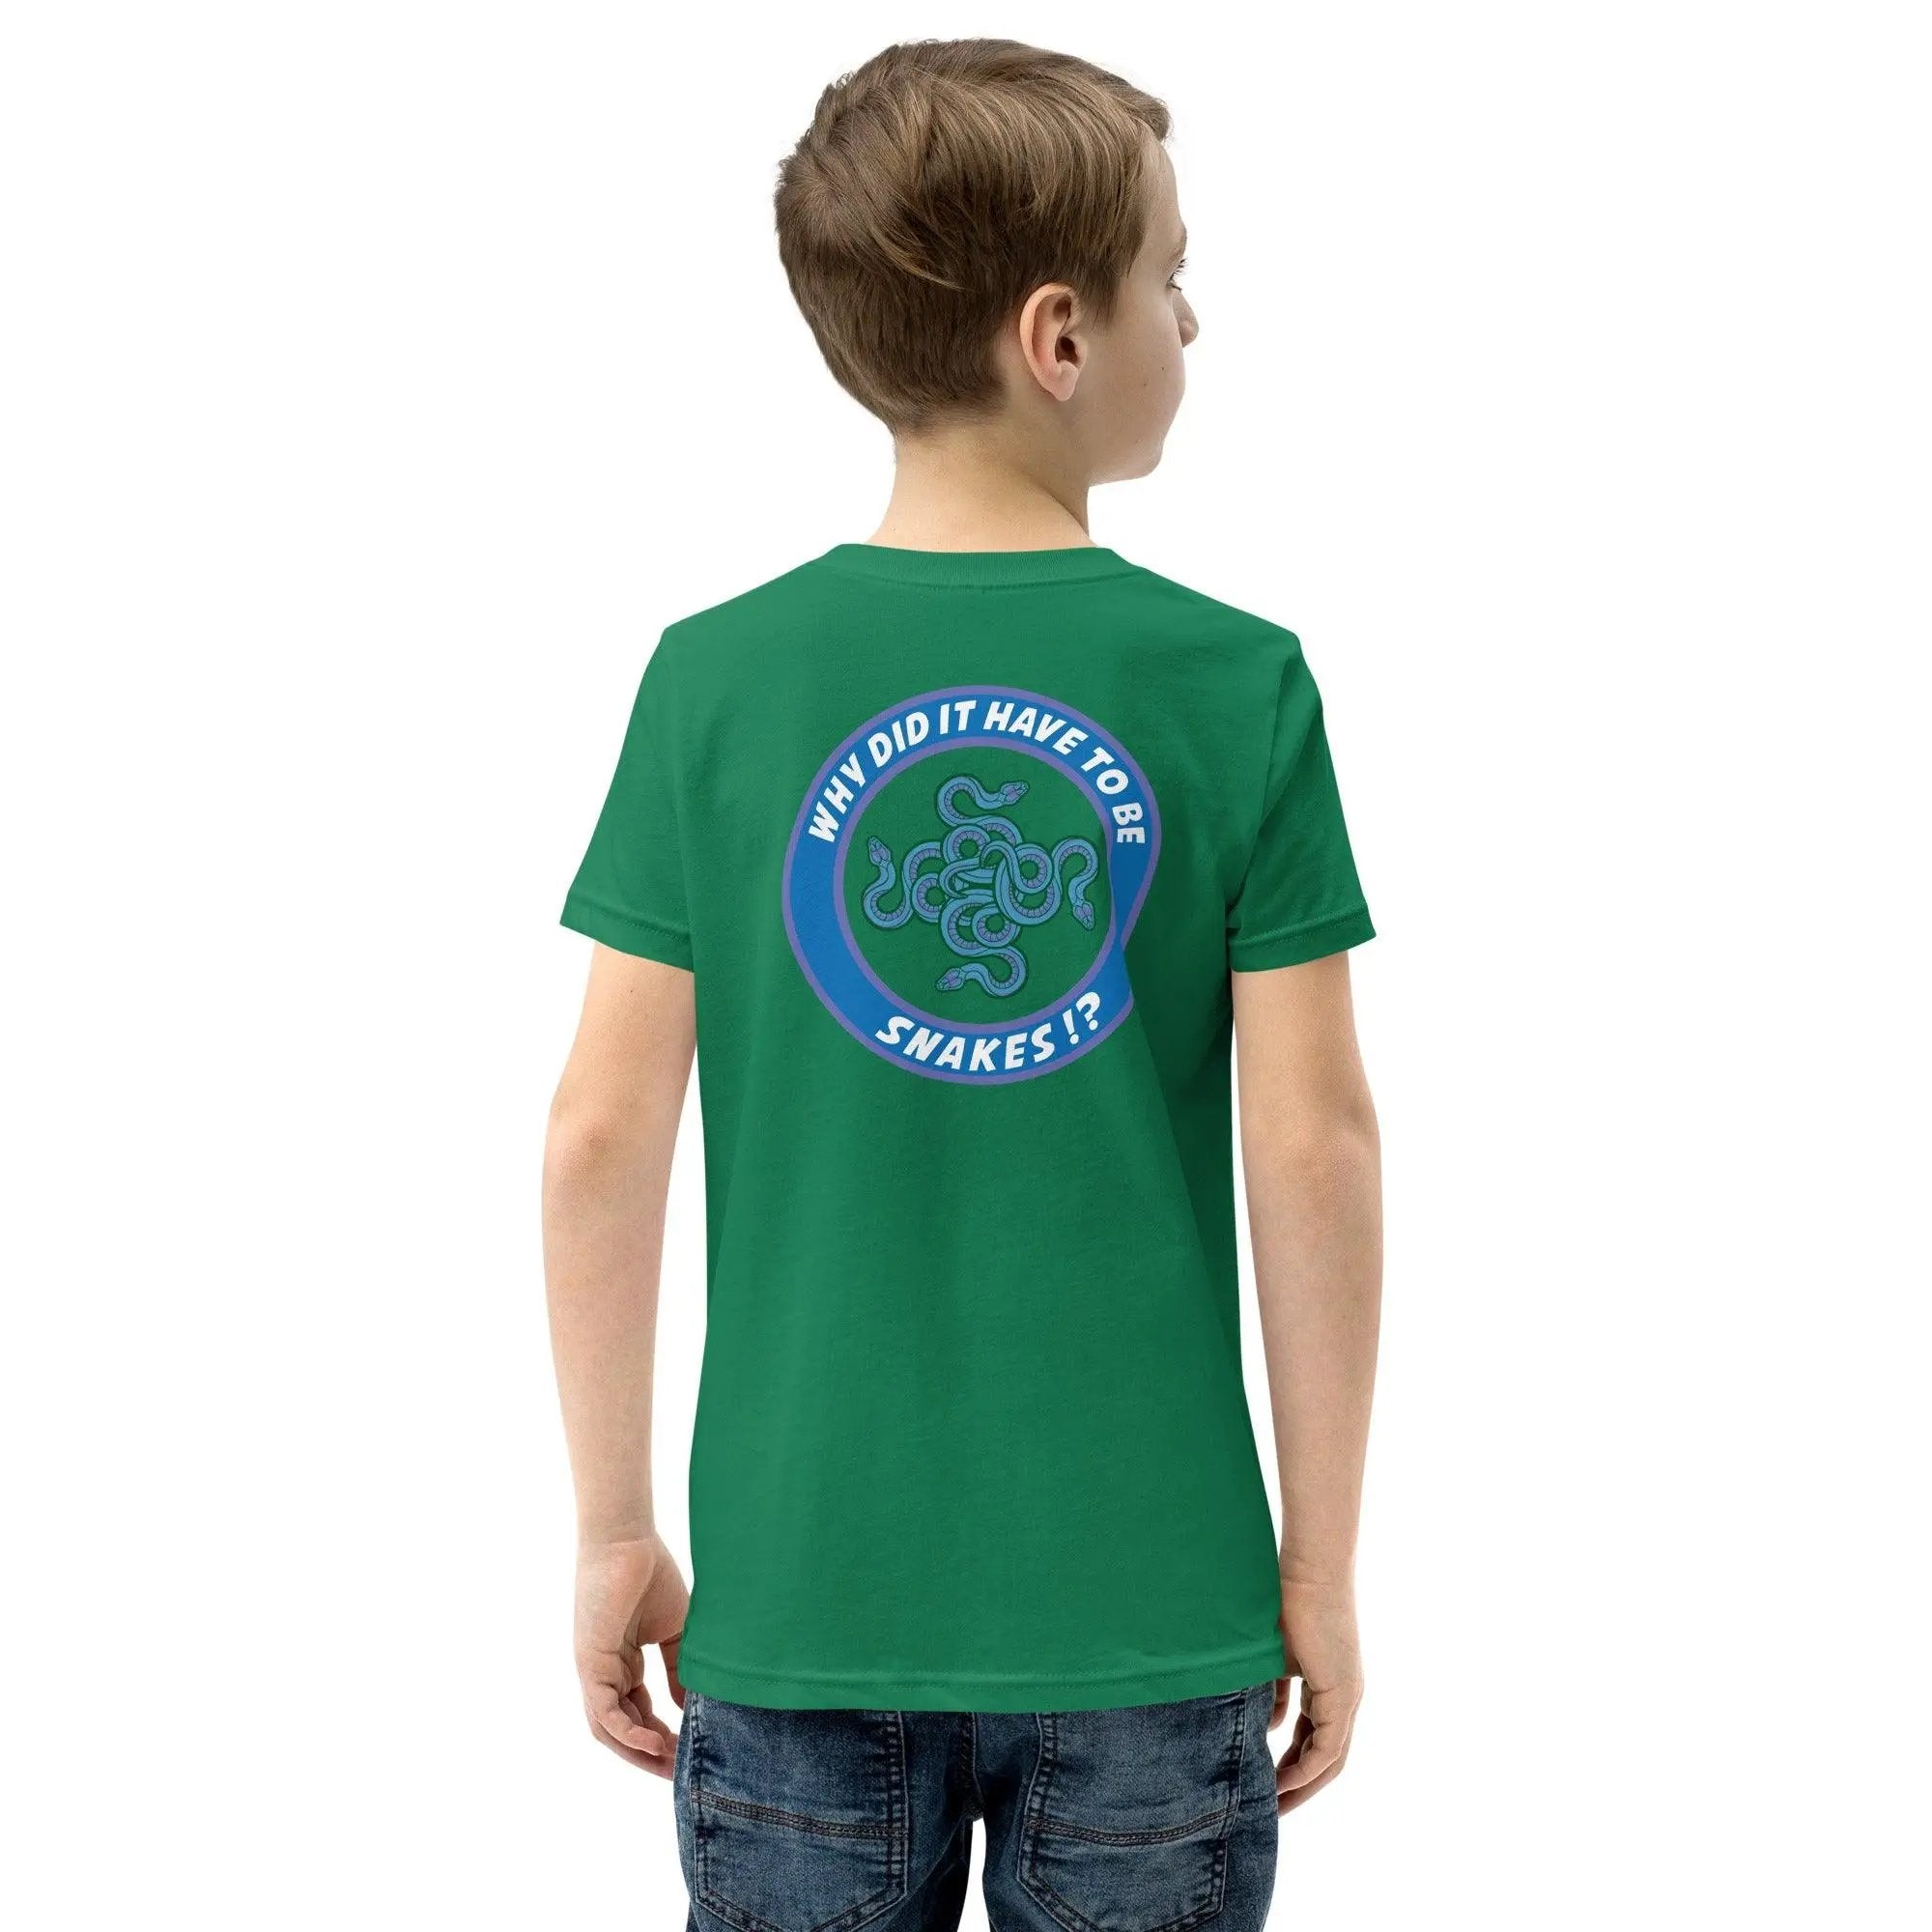 Why Did It Have To Be Snakes? Youth Short Sleeve T-Shirt